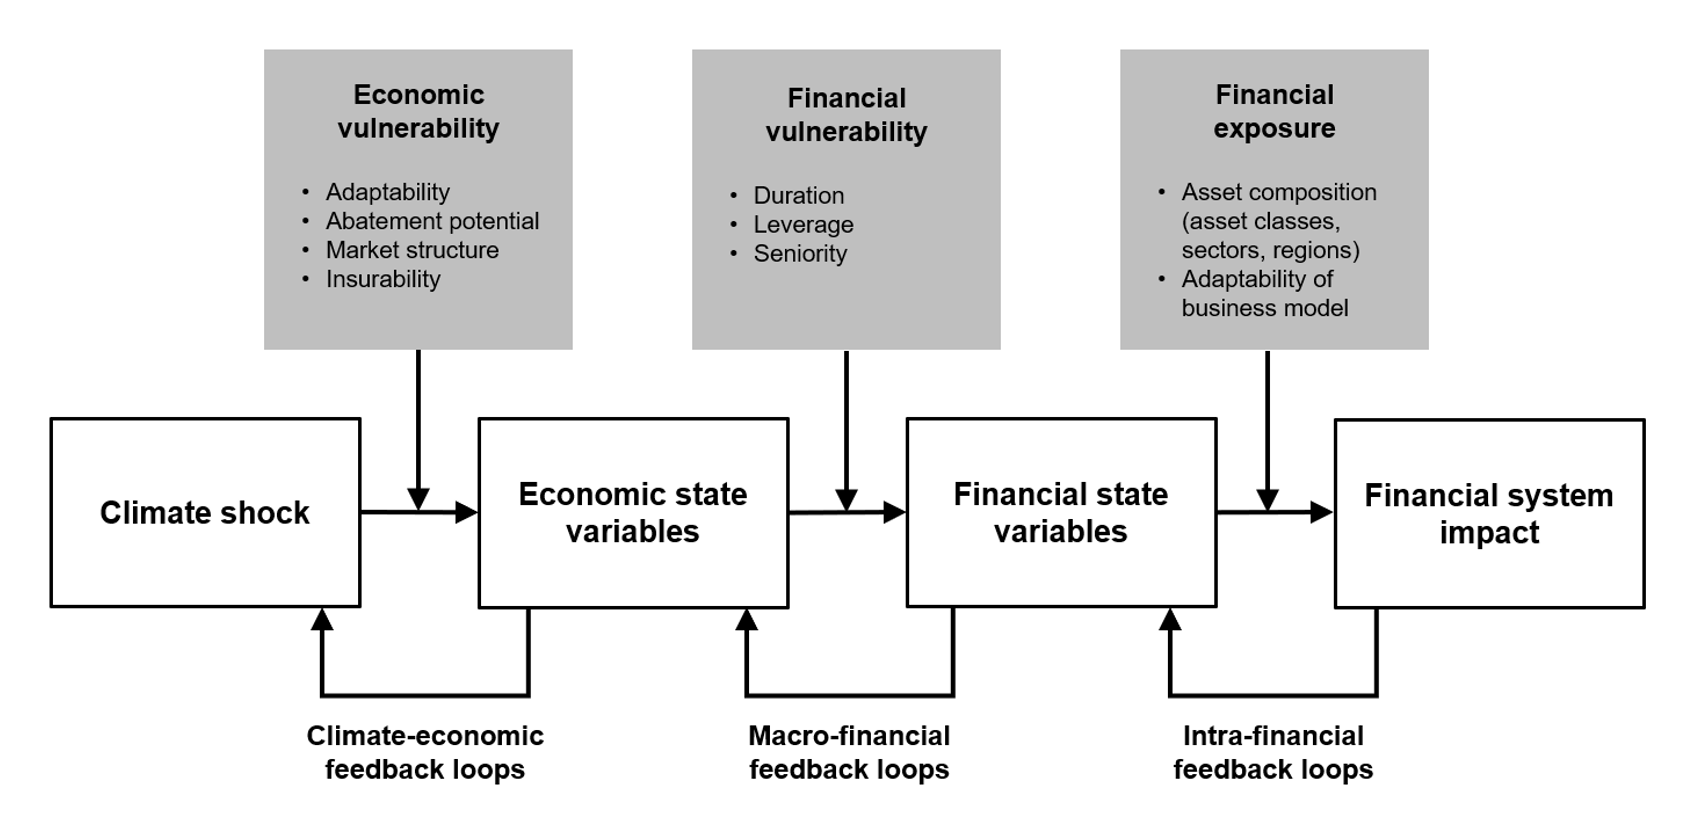 Figure 2 Moderating variables and feedback loops in the climate-financial relation